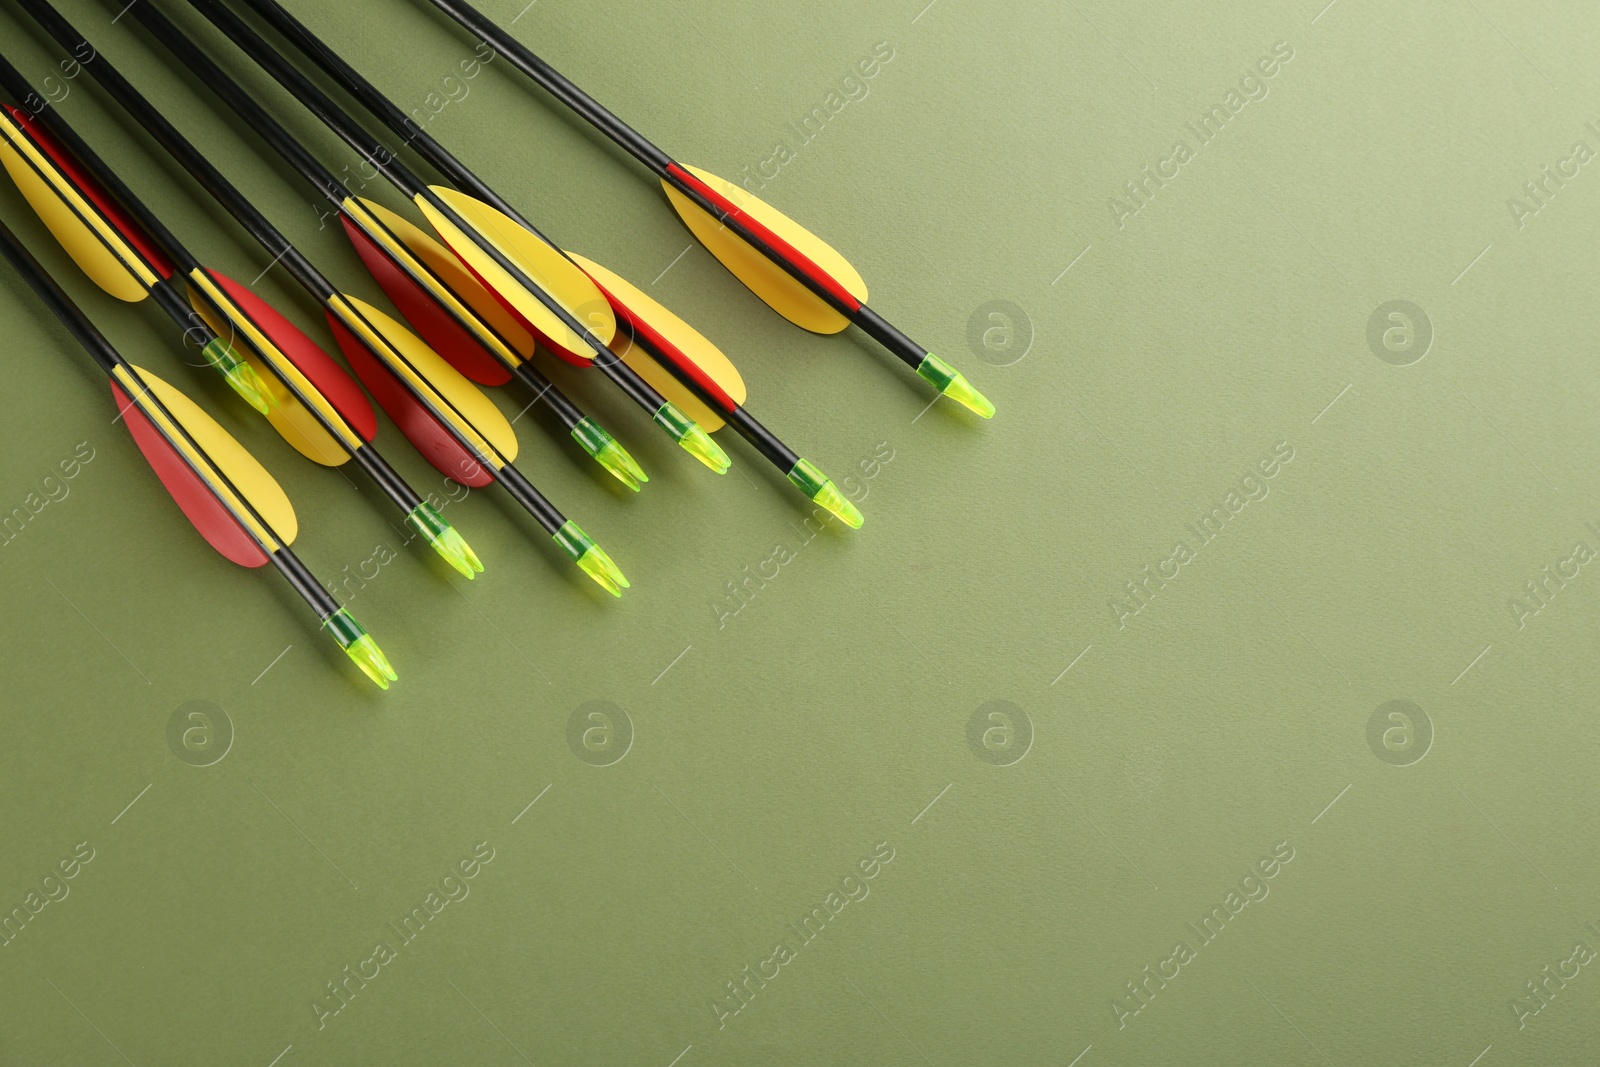 Photo of Plastic arrows on olive background, flat lay with space for text. Archery sports equipment